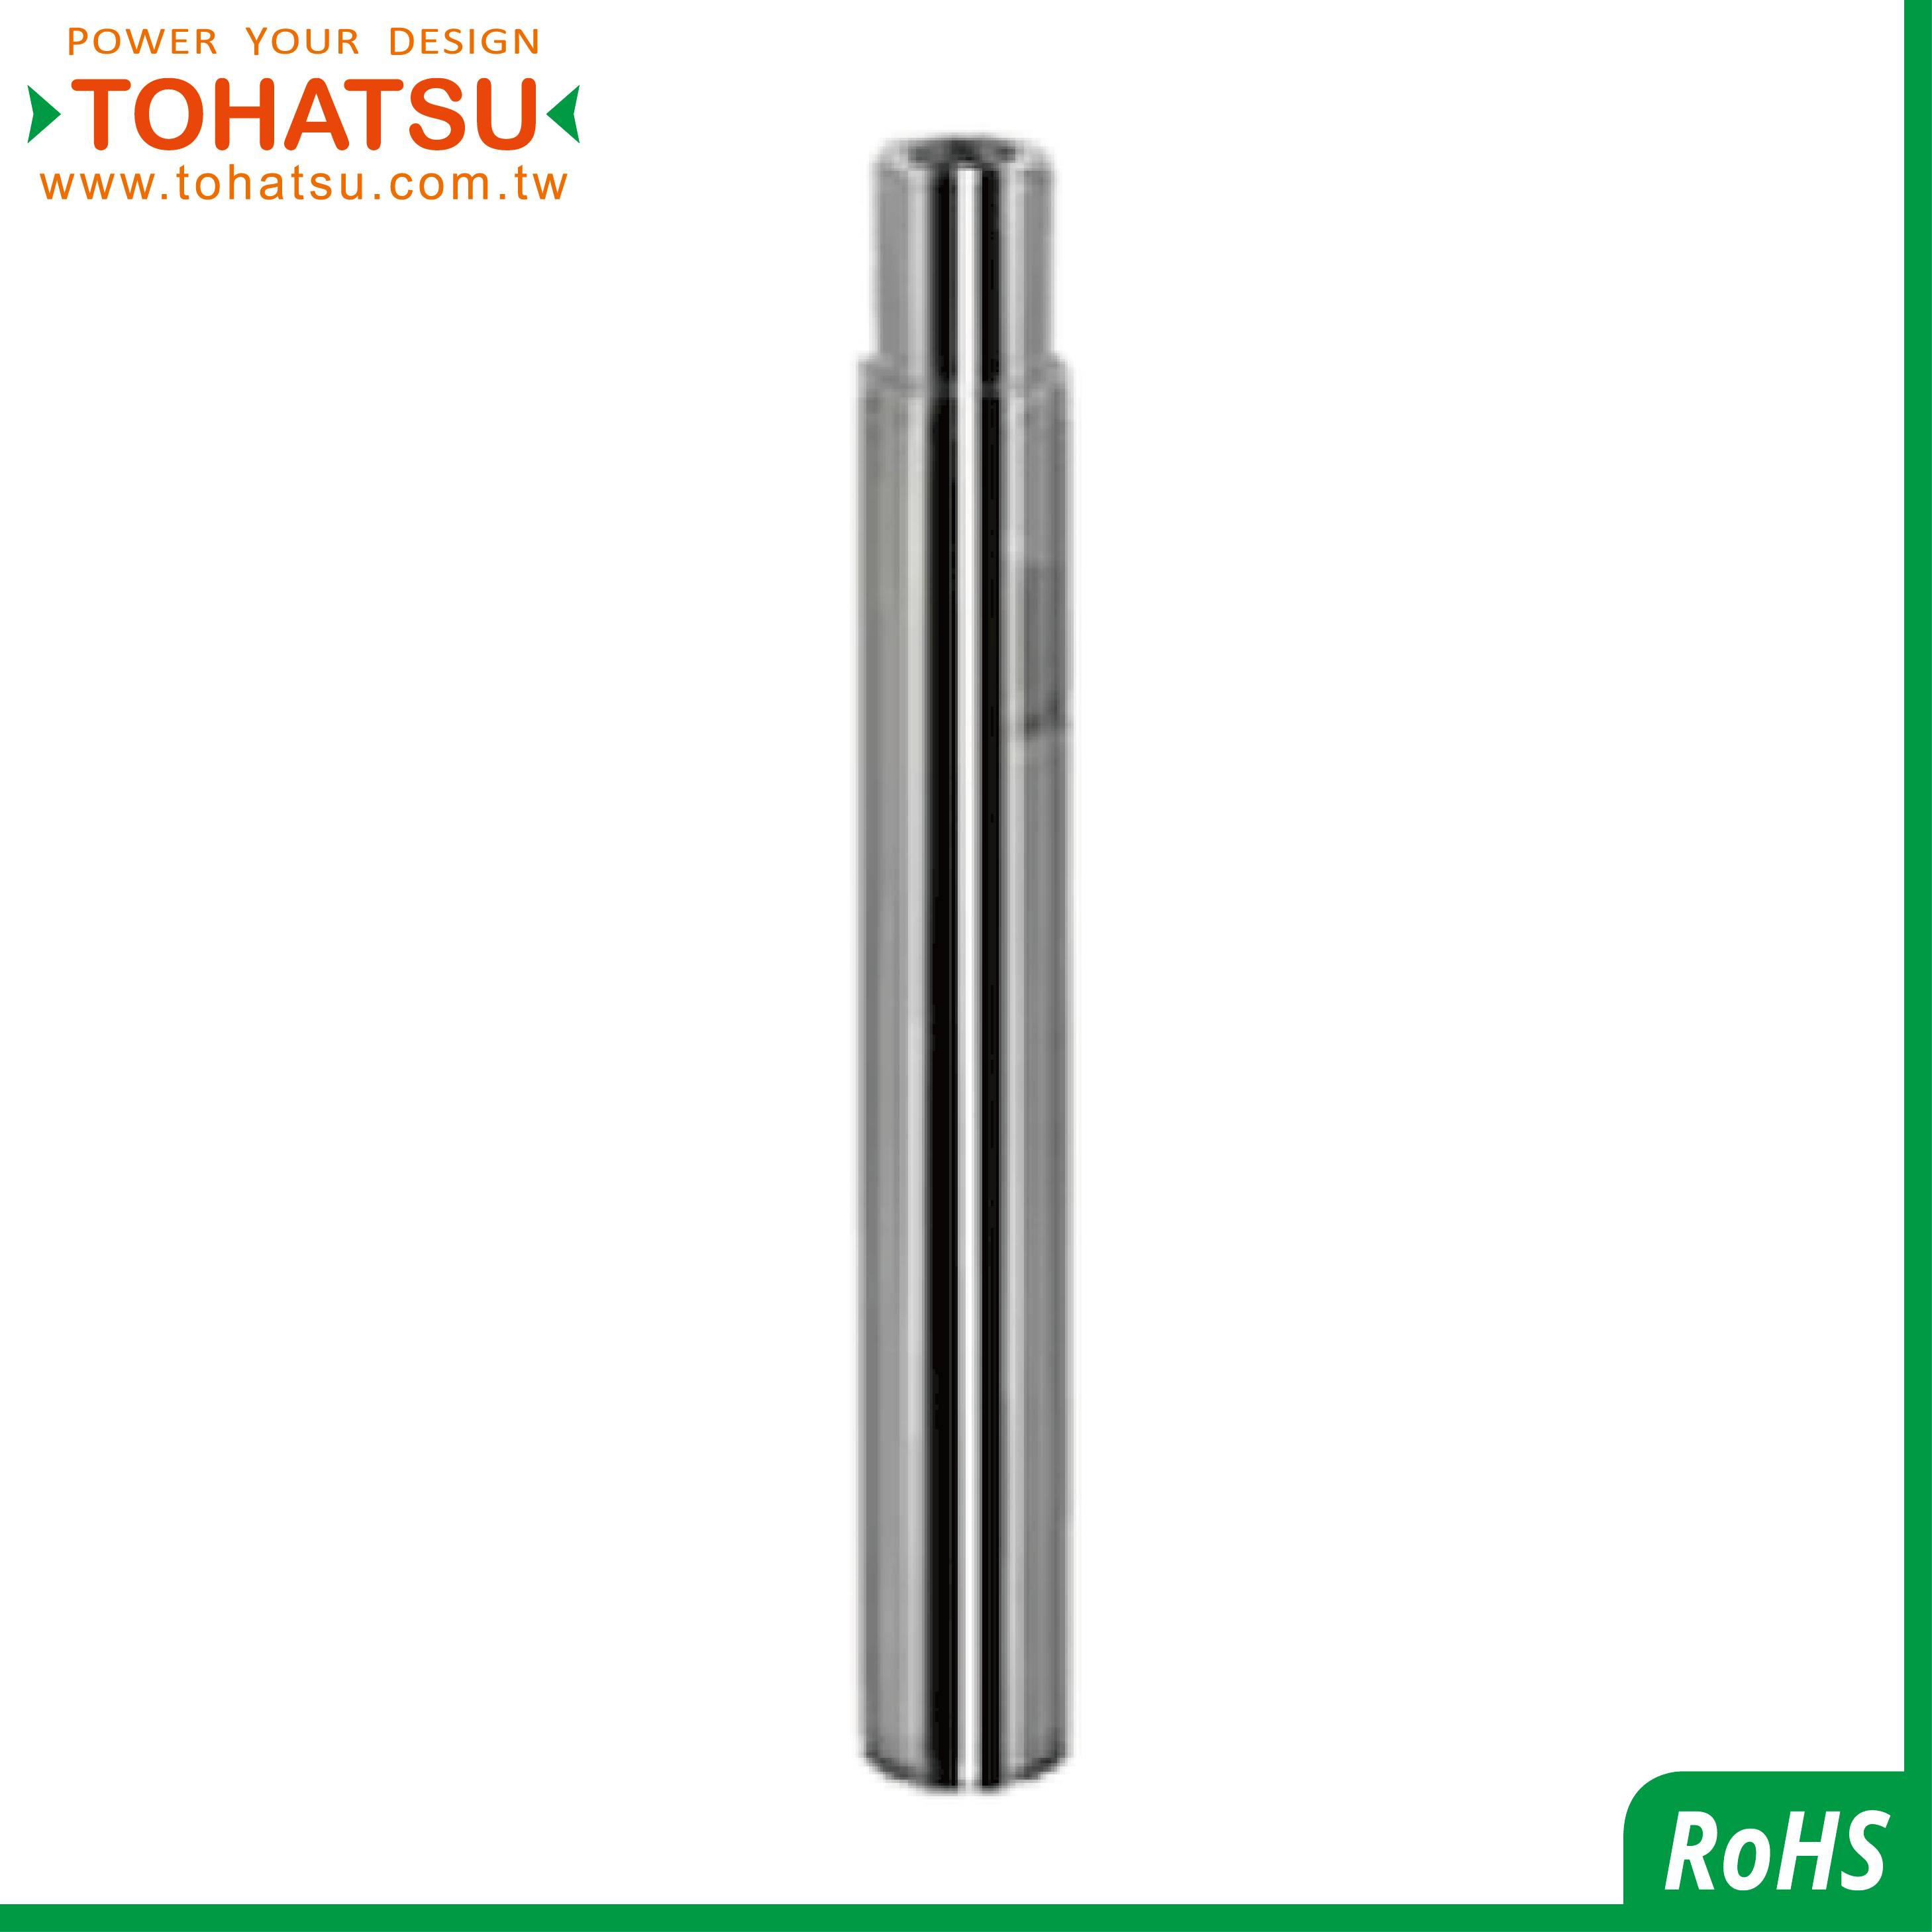 Precision Linear Shafts (One End Stepped and Female Thread with Wrench Fats)